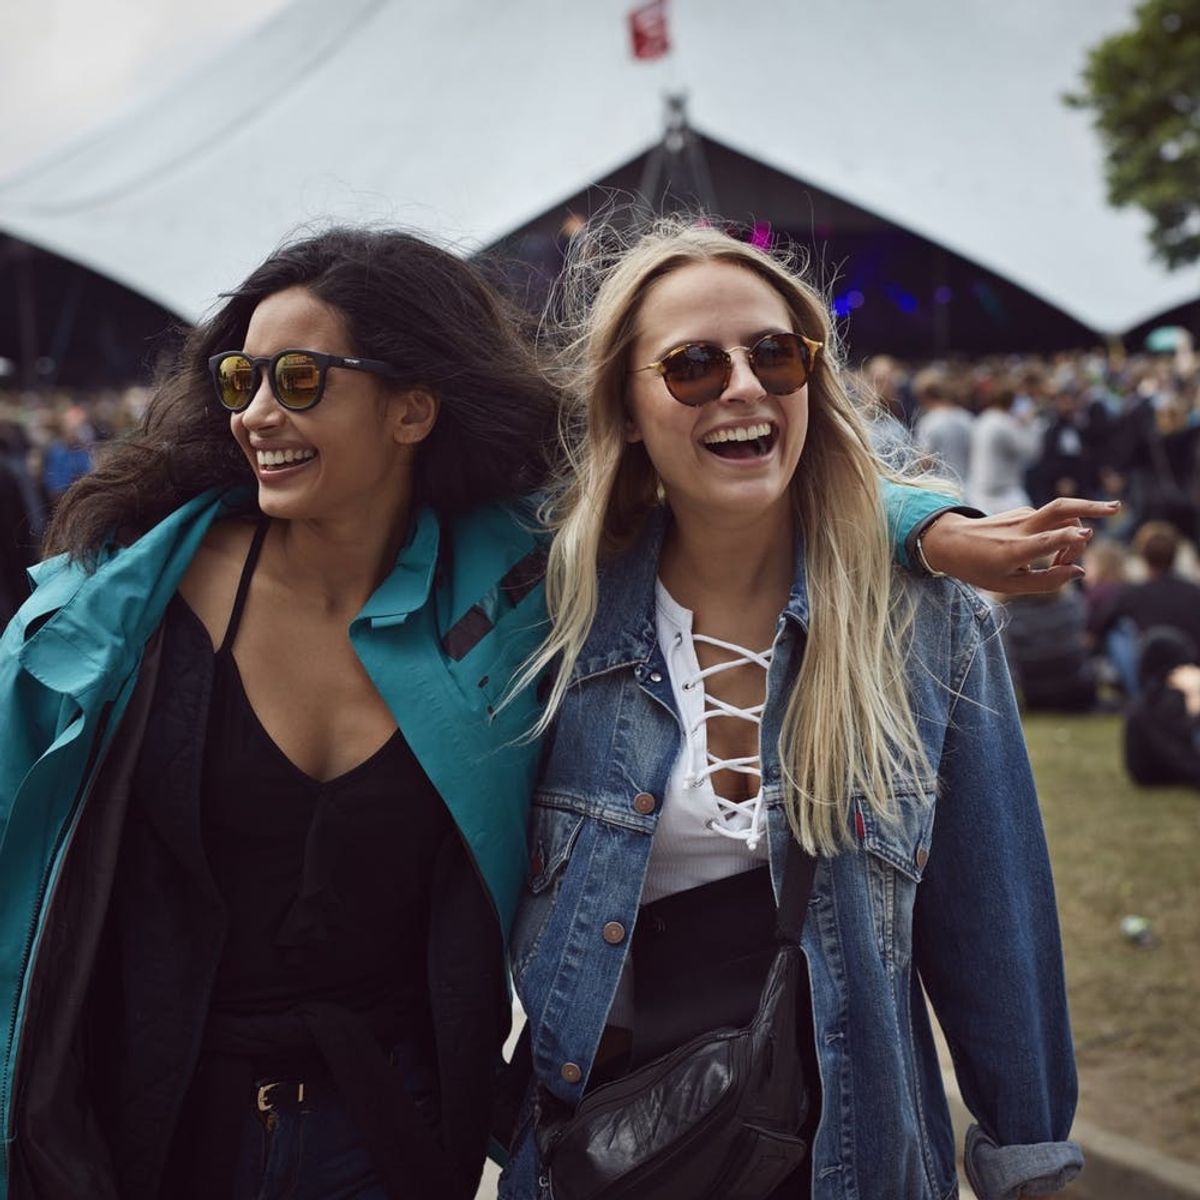 How to Stay Safe During Festival Season